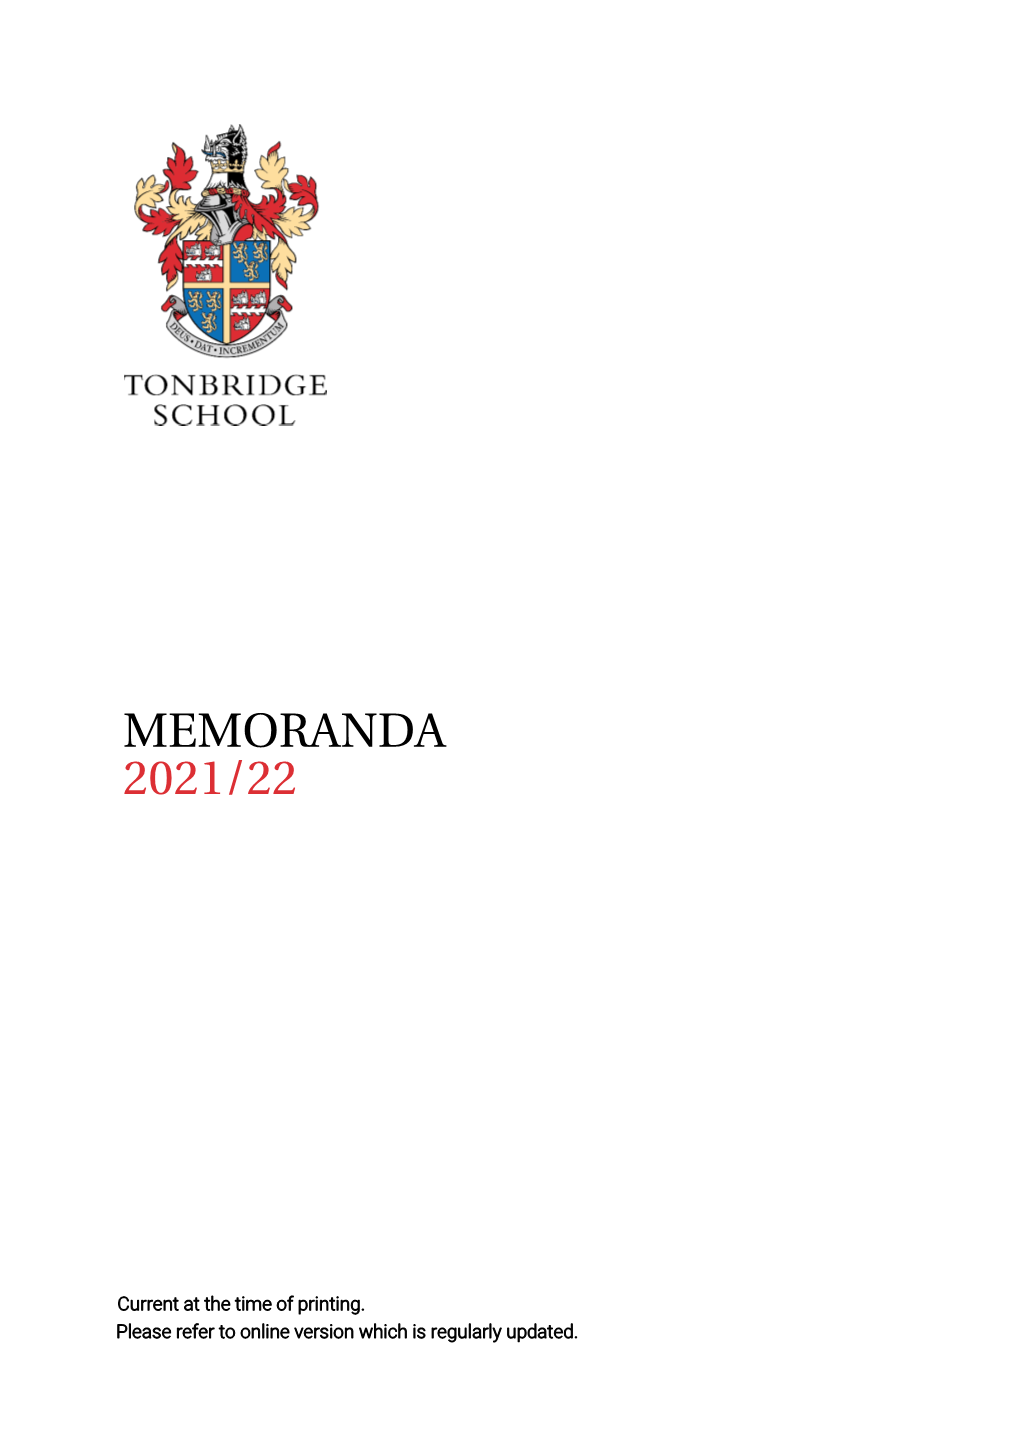 MEMORANDA 2019/20 (Current at the Time of Printing. Please Refer To